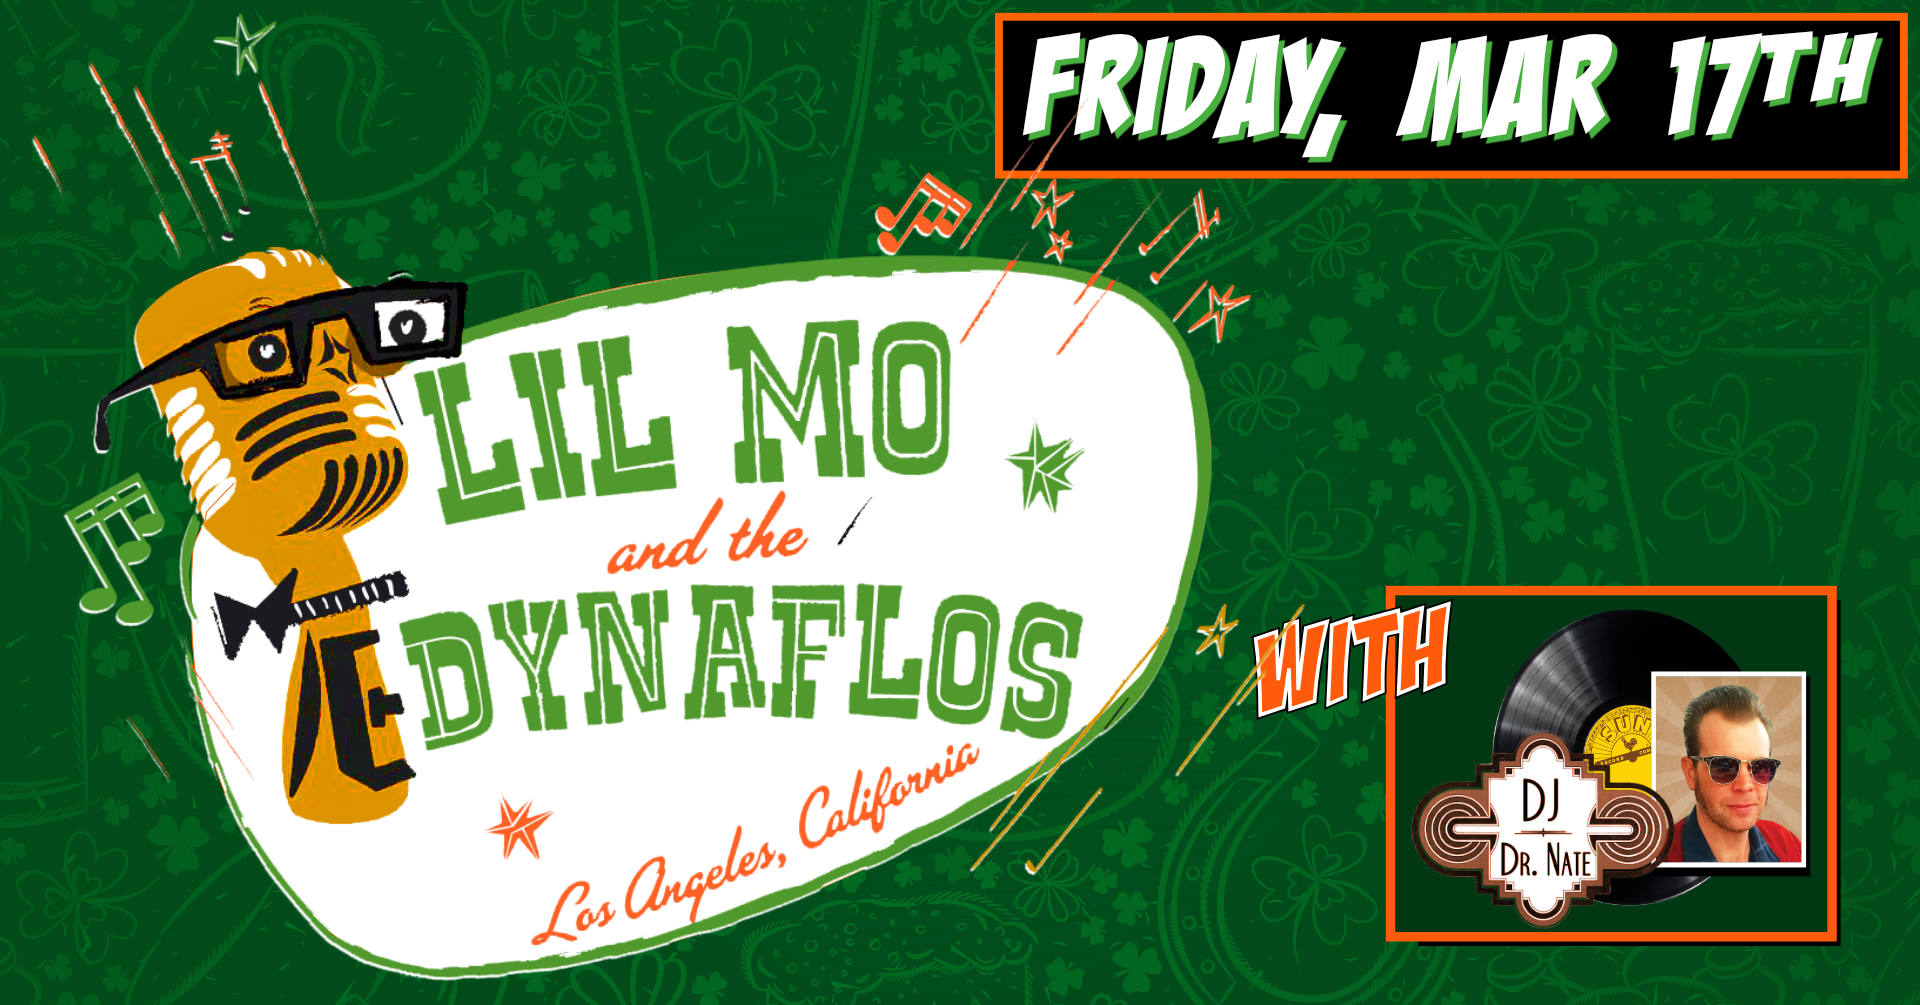 ST. PATRICK’S DAY with LIL MO & THE DYNAFLOS plus DJ DR. NATE at The Moose!